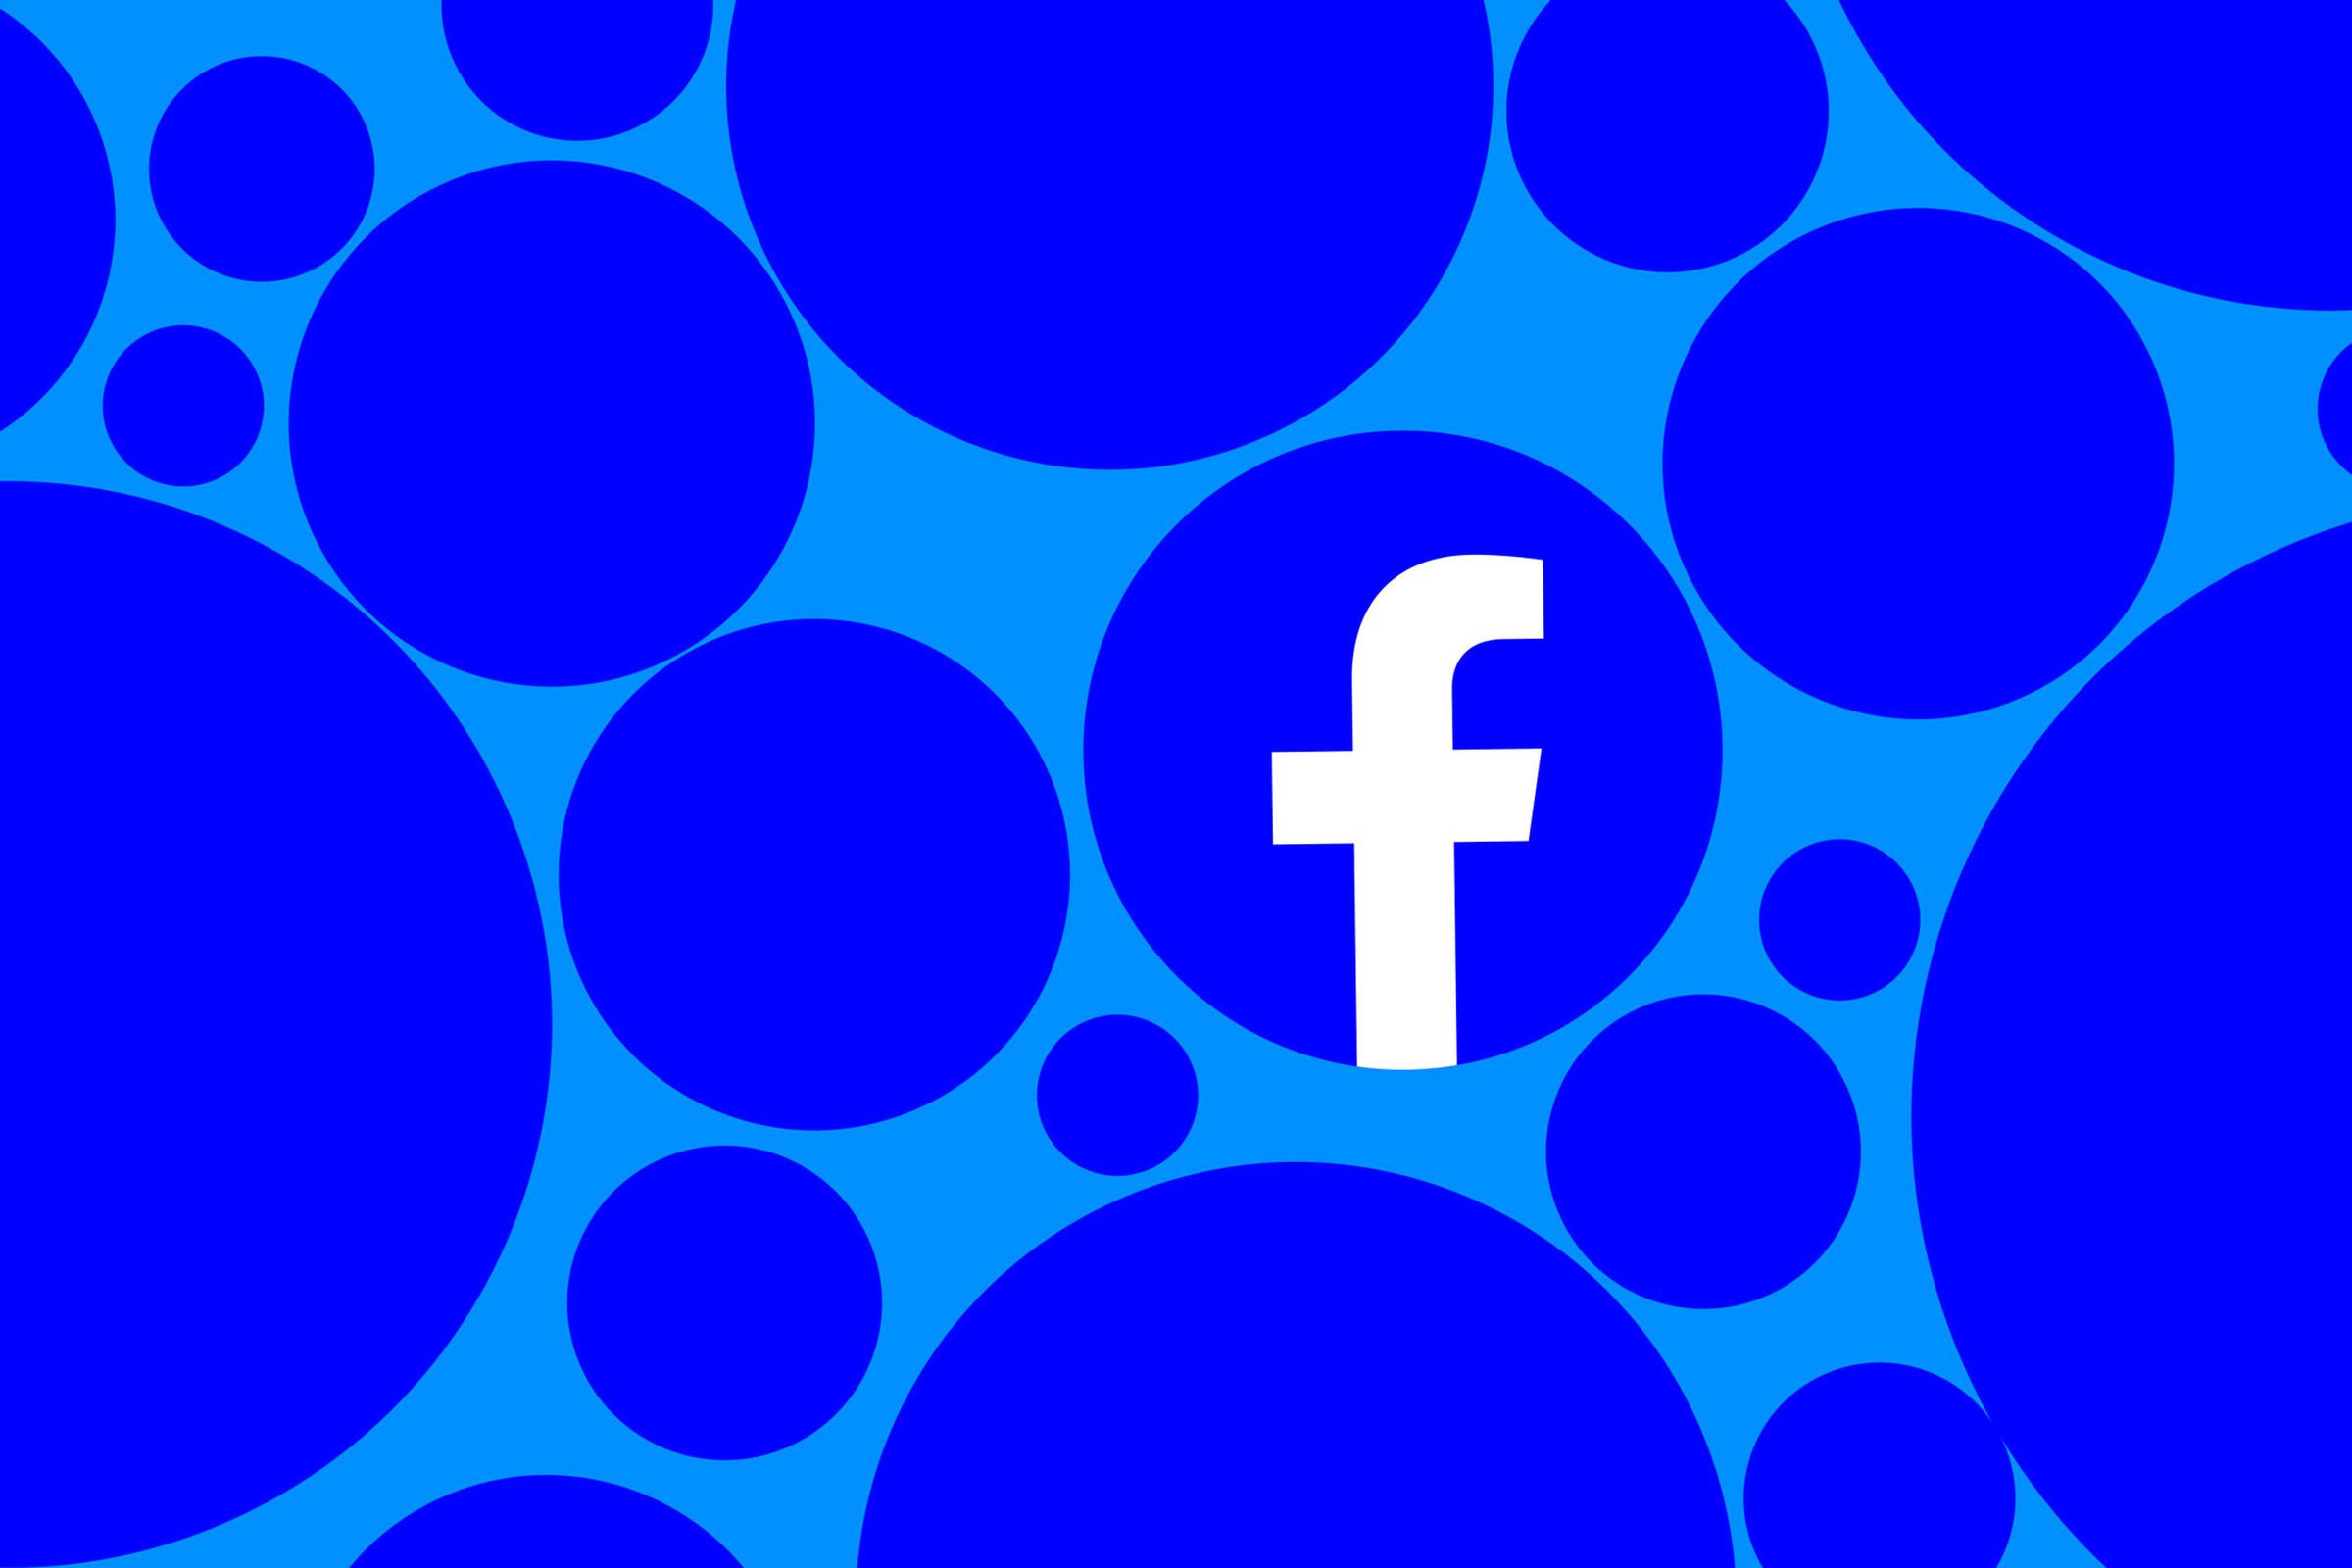 The Facebook logo on a blue background surrounded by blue circles.